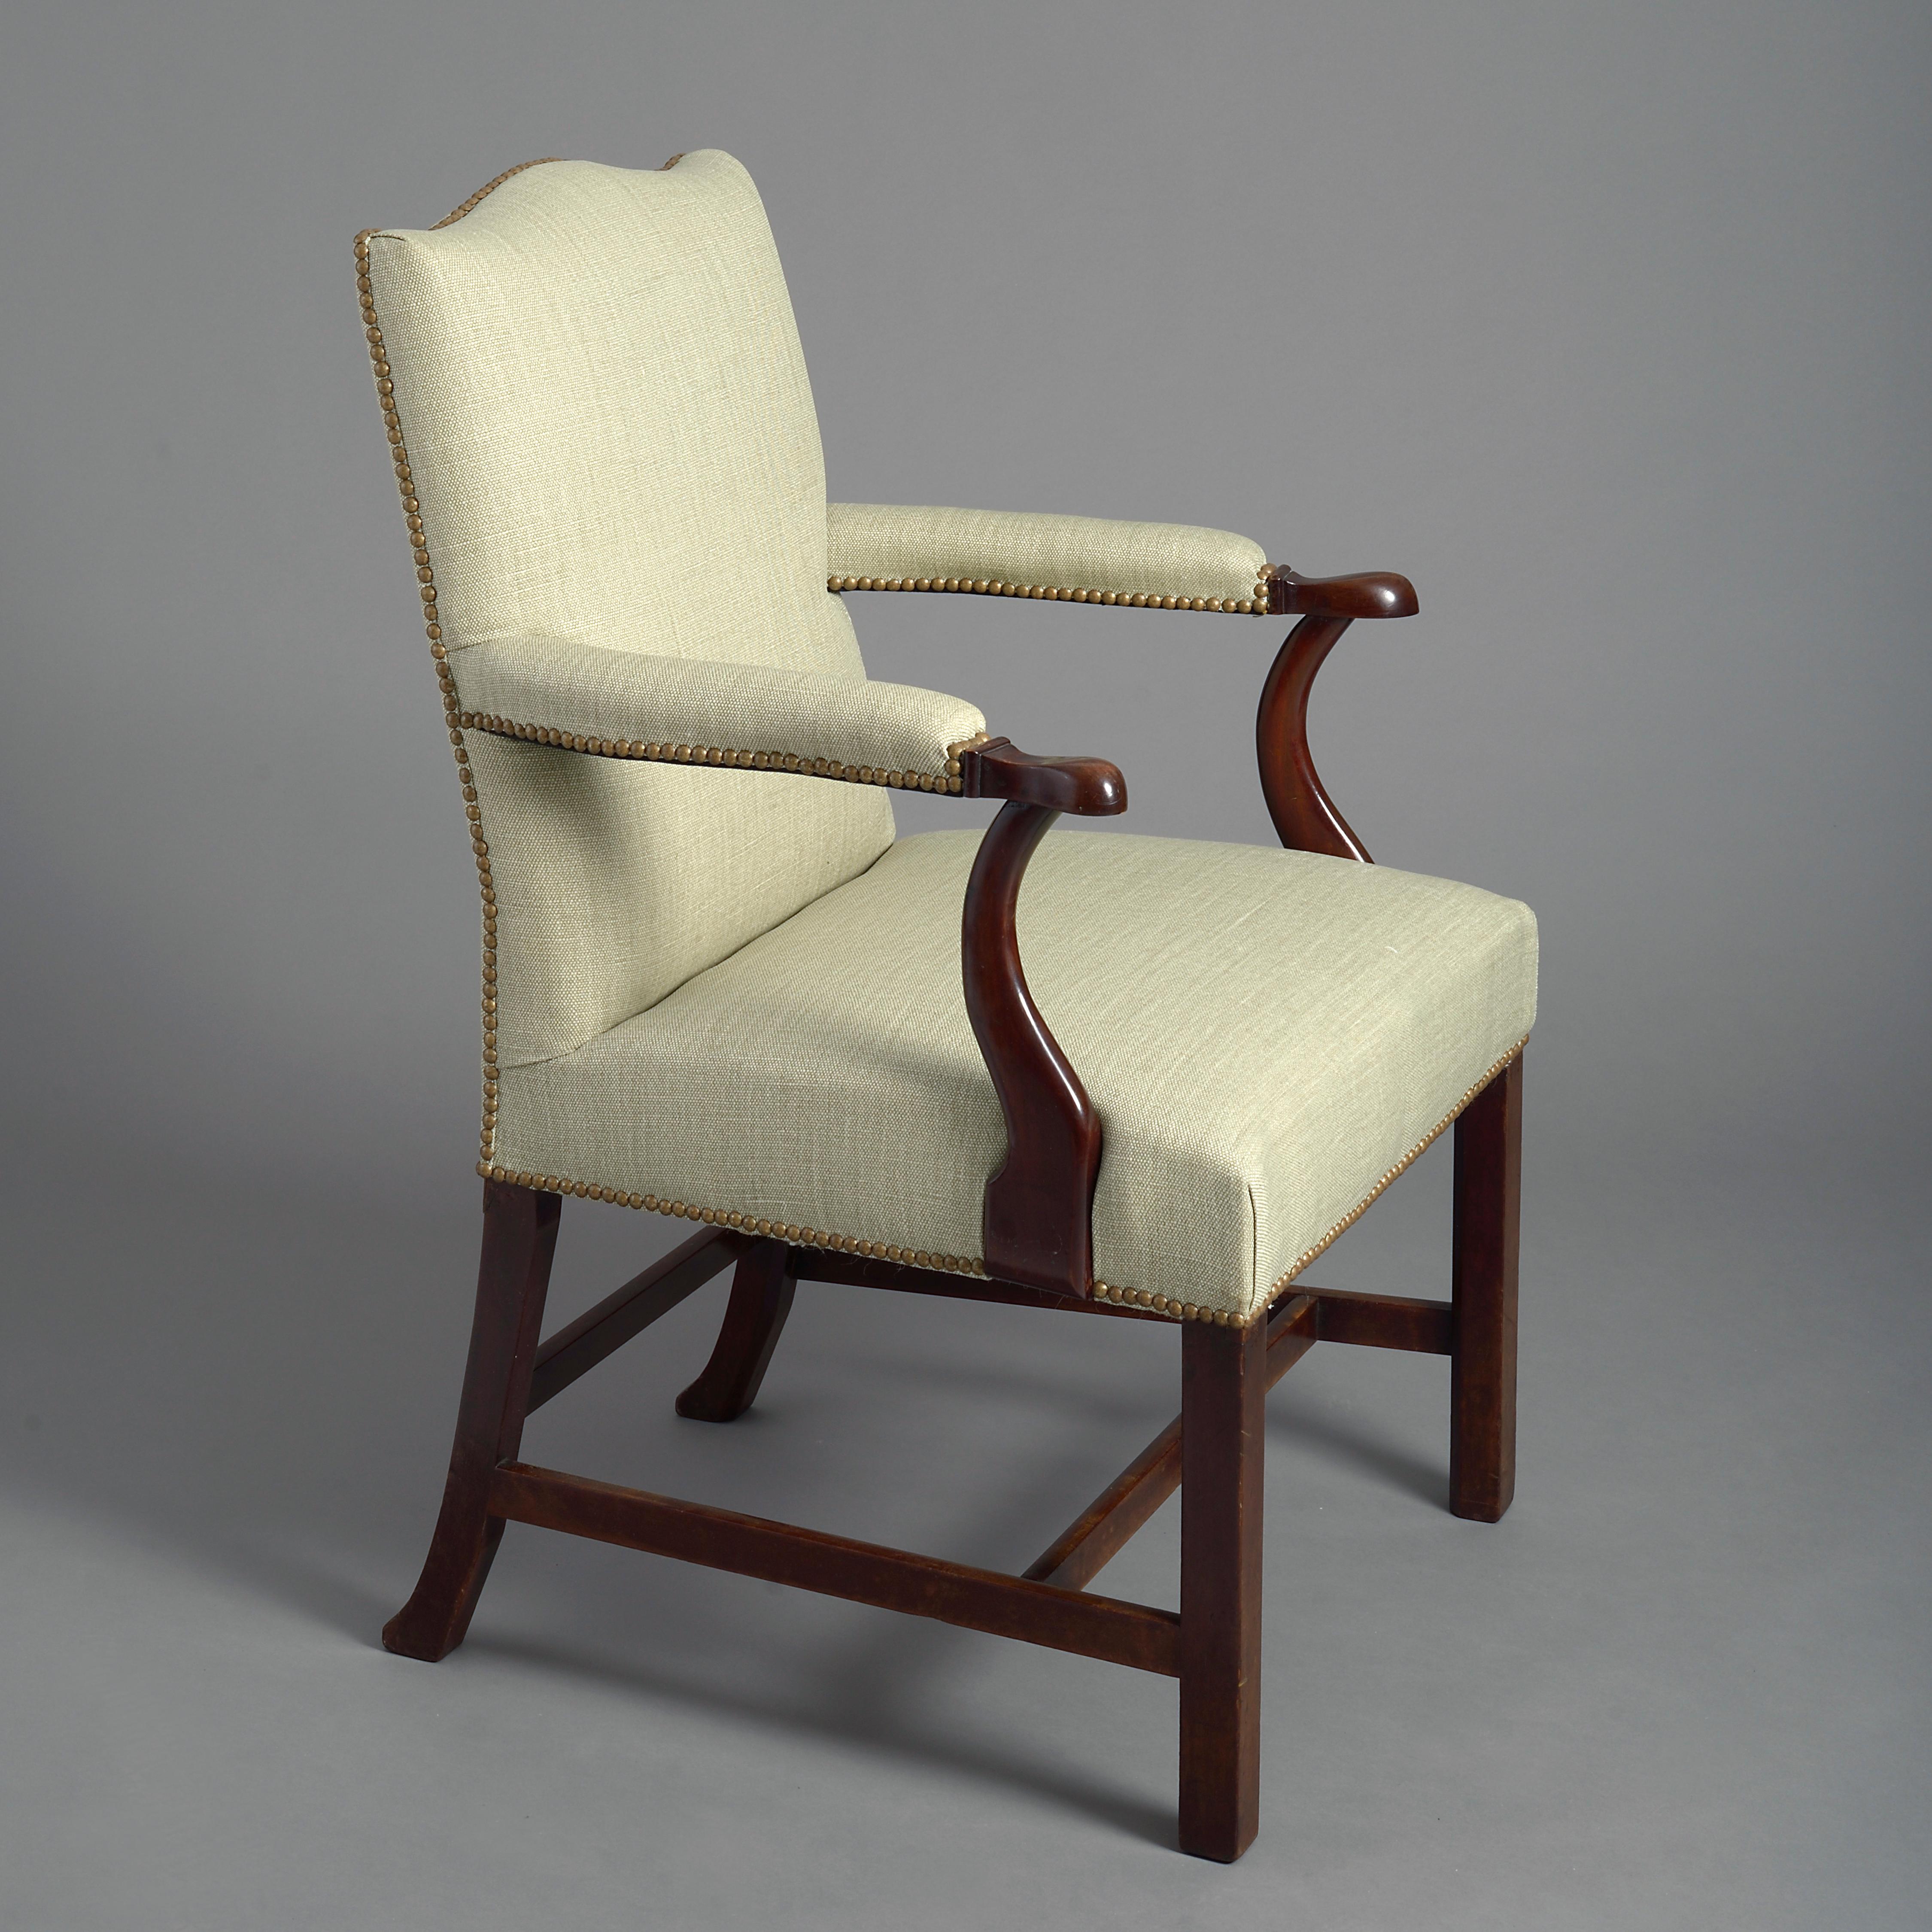 A mid-18th century George III Period Gainsborough armchair, the upholstered back having a serpentine crest rail, the mahogany arms with over-stuffed pads upon an upholstered seat, terminating in square block legs with H-form stretchers.